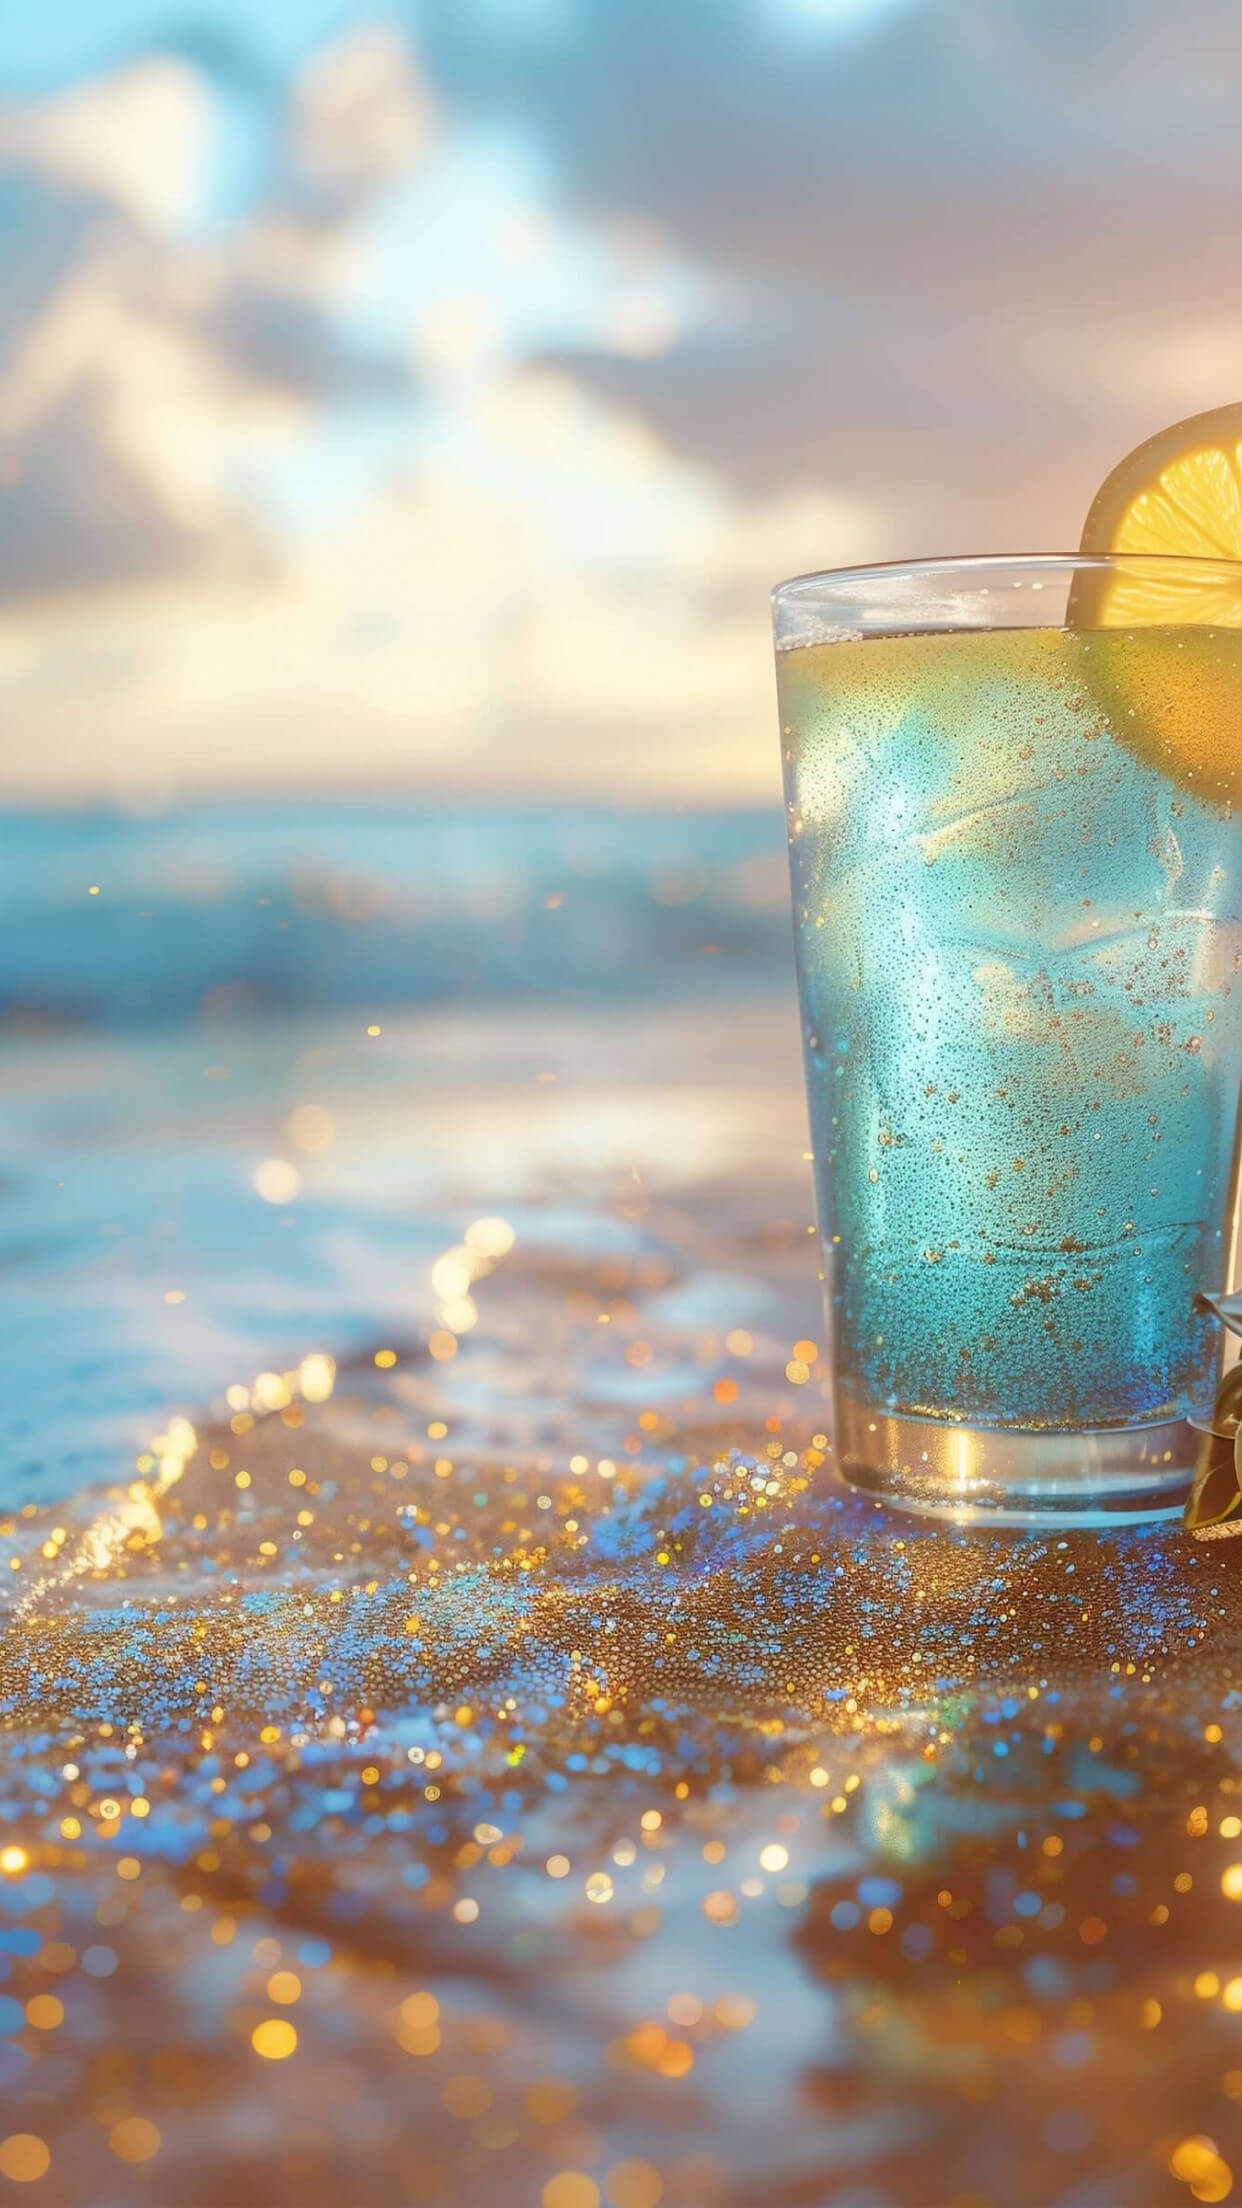 Cold drink on the ocean shore wallpaper 1242x2208